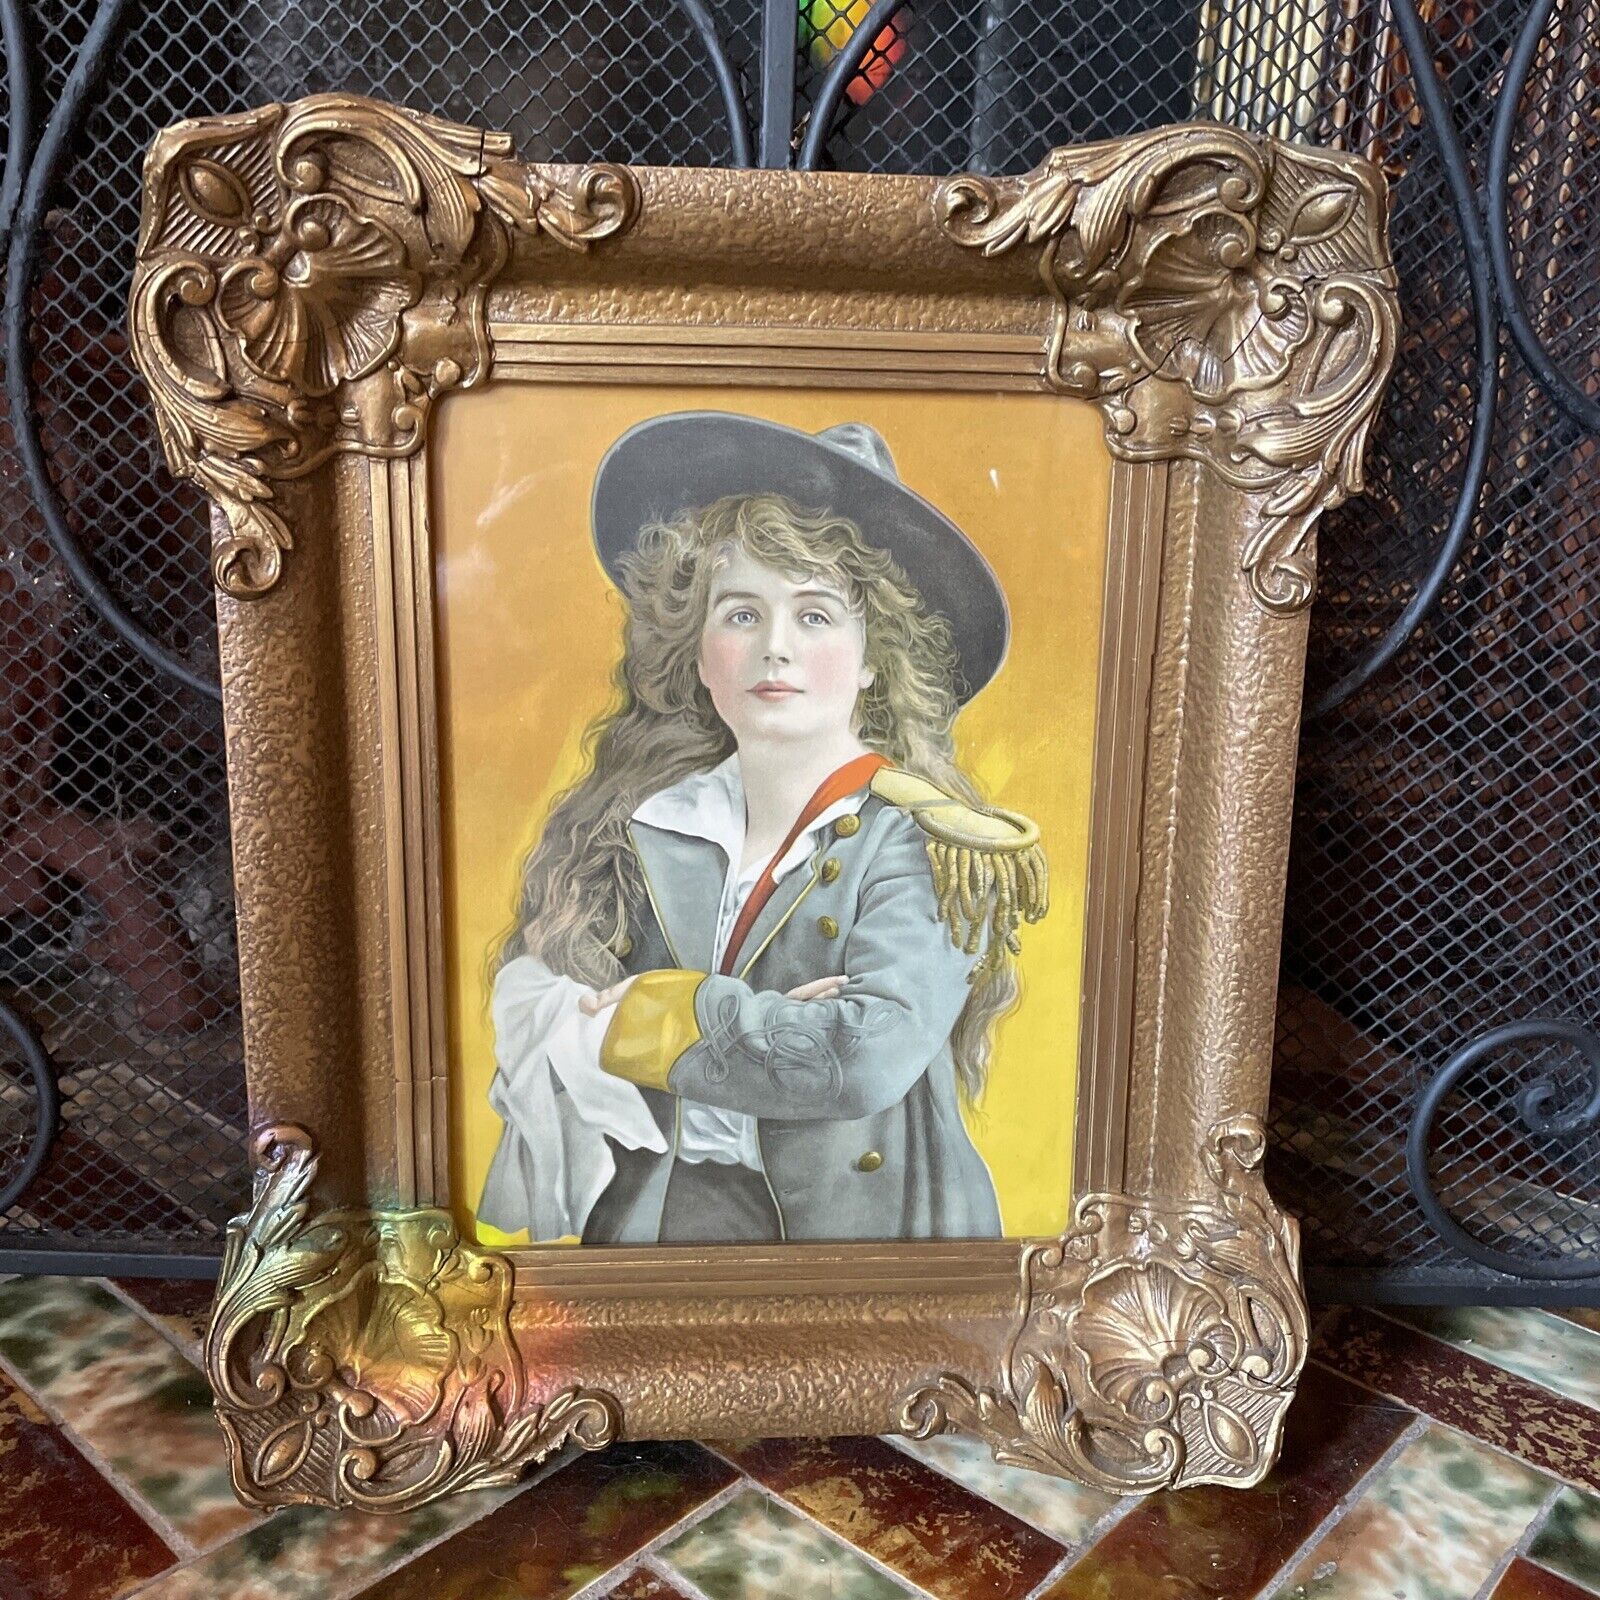 Antique 1903 Irene Bentley Print “the girl from Dixie” US Civil War officer woma